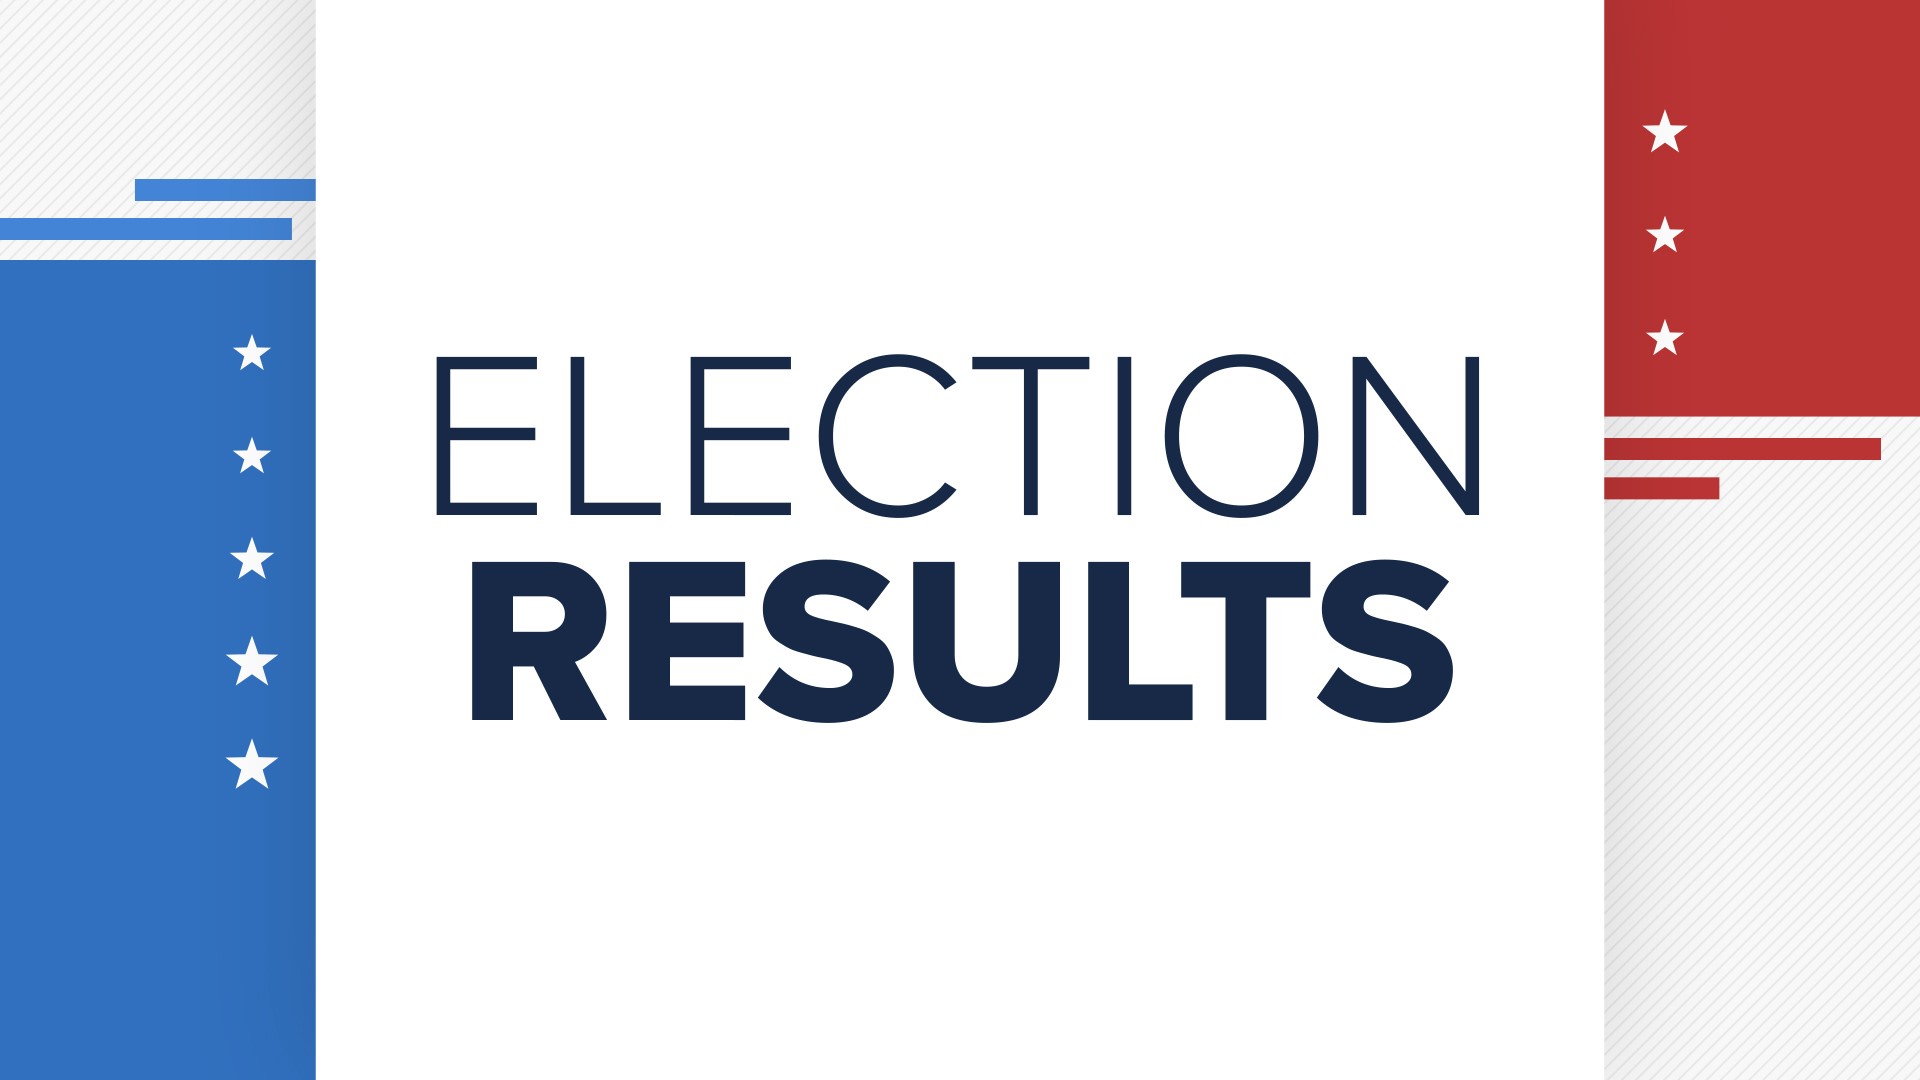 Up-to-date results from elections offices